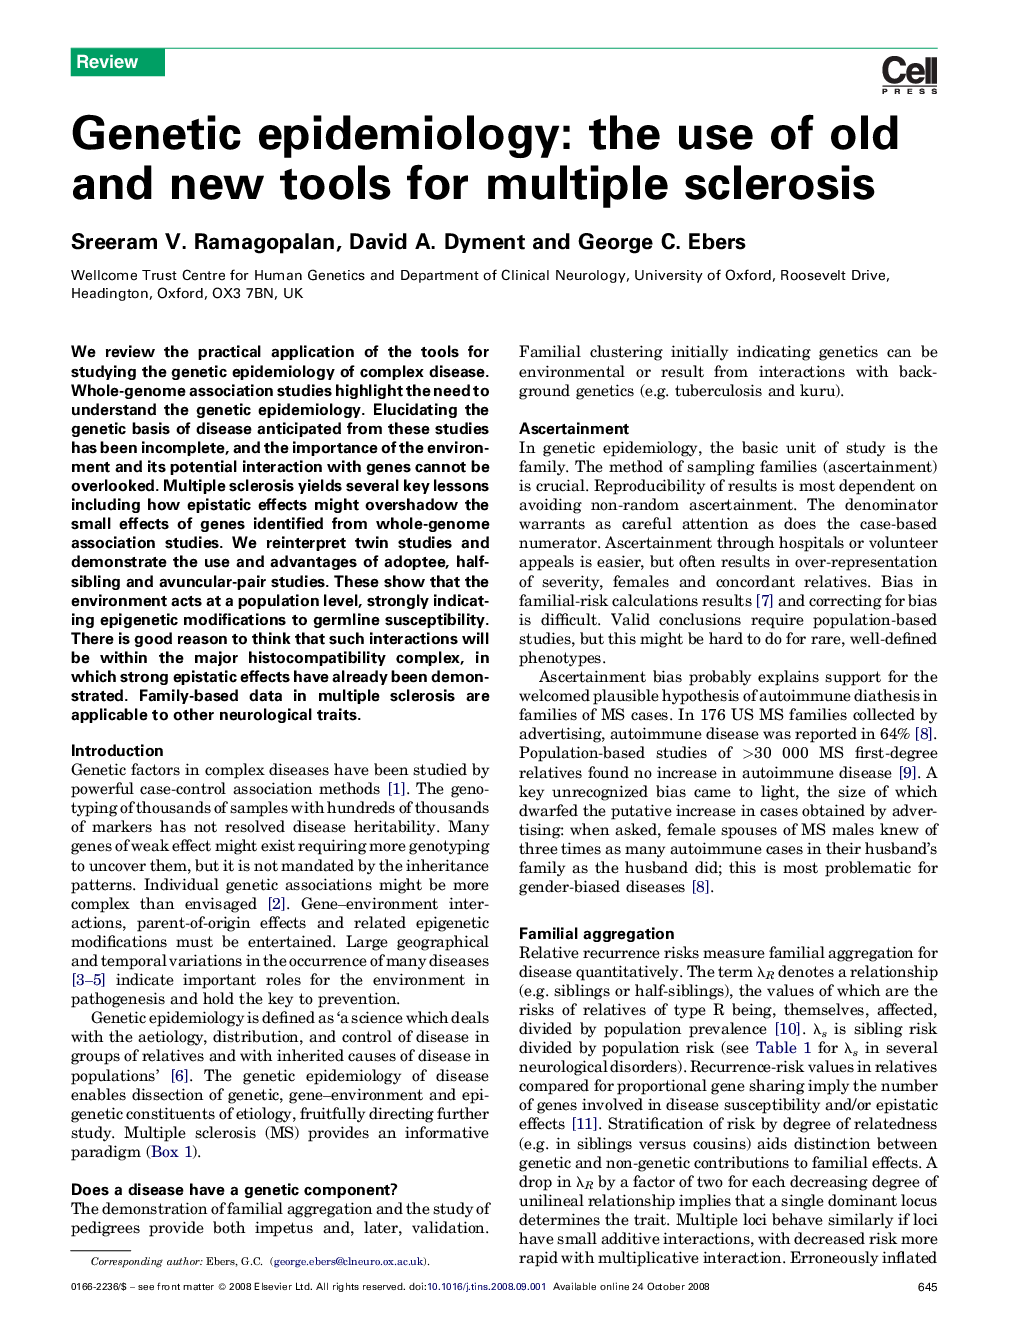 Genetic epidemiology: the use of old and new tools for multiple sclerosis